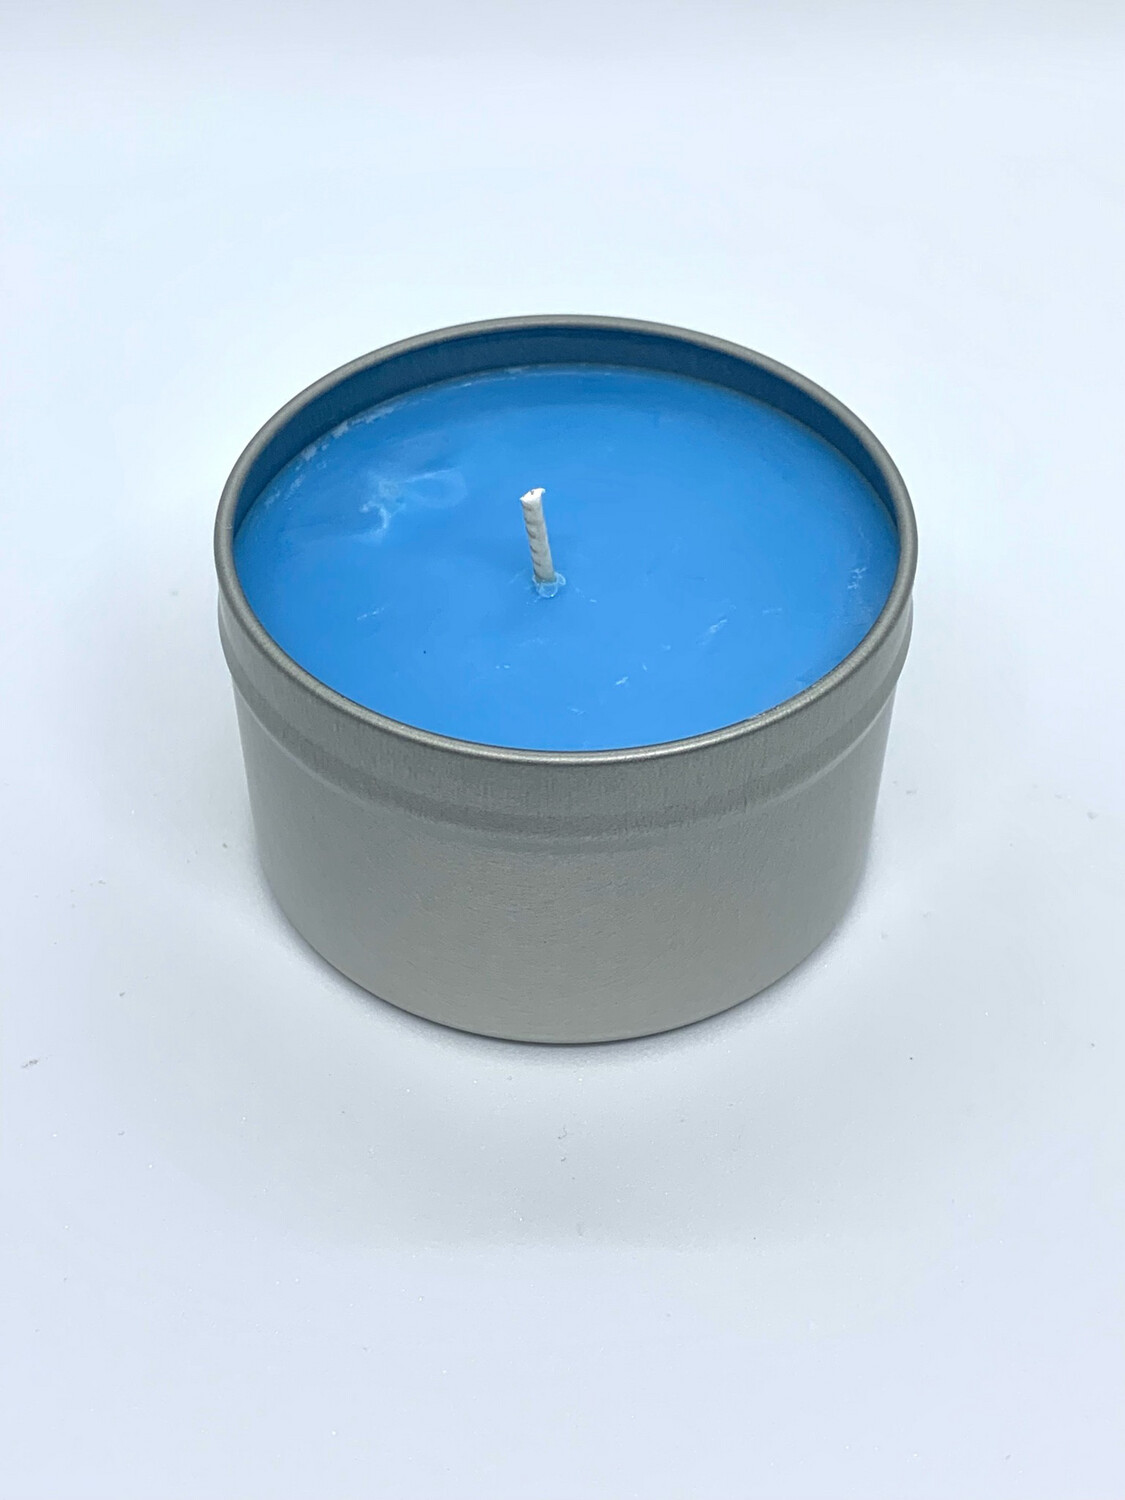 8oz. Candle – Winter Session